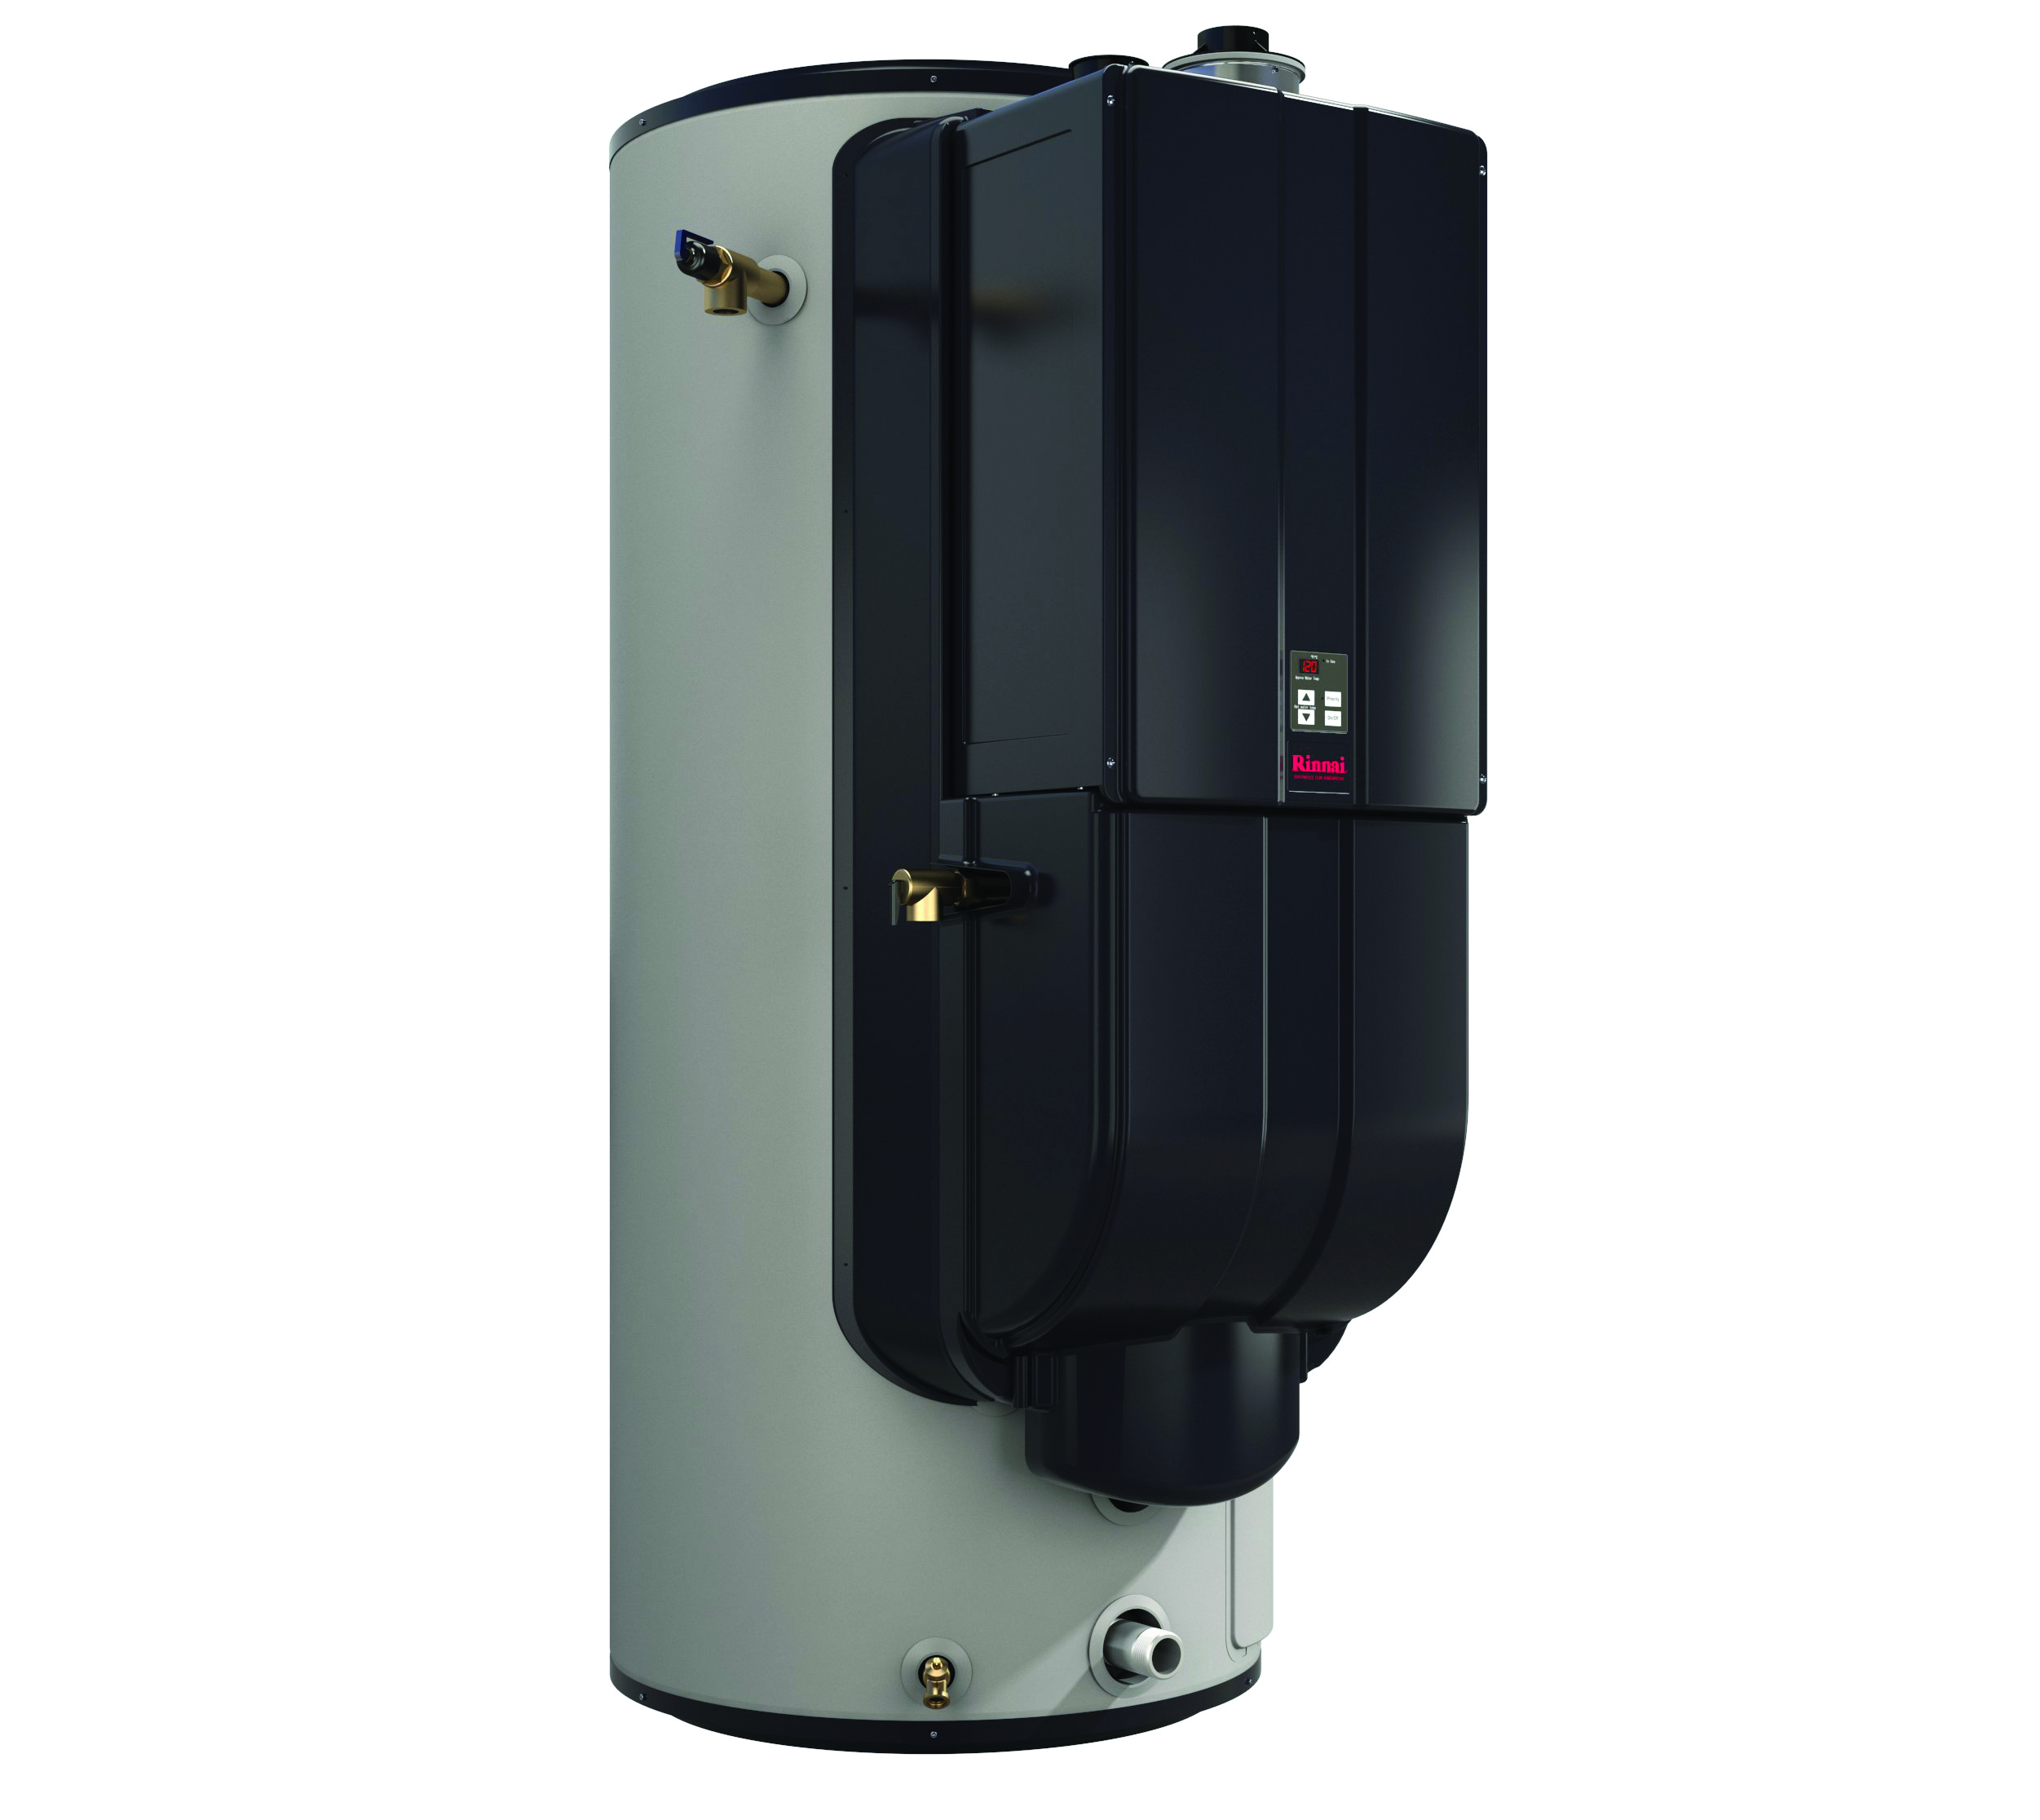 demand-duo-hybrid-commercial-water-heating-system-rinnai